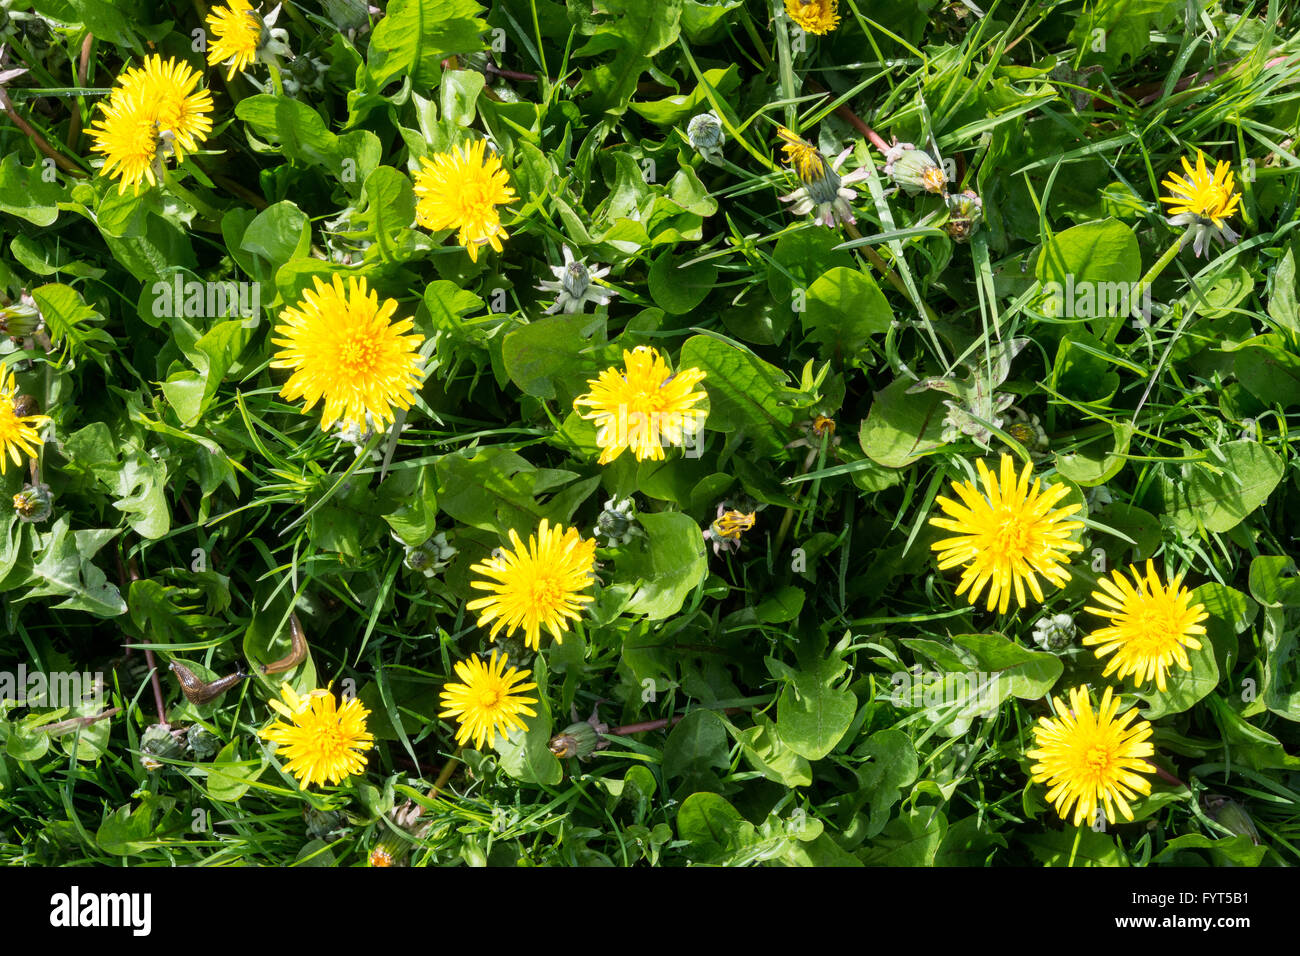 Common Dandelions (Taraxacum officinale) in flower growing in a lawn Stock Photo